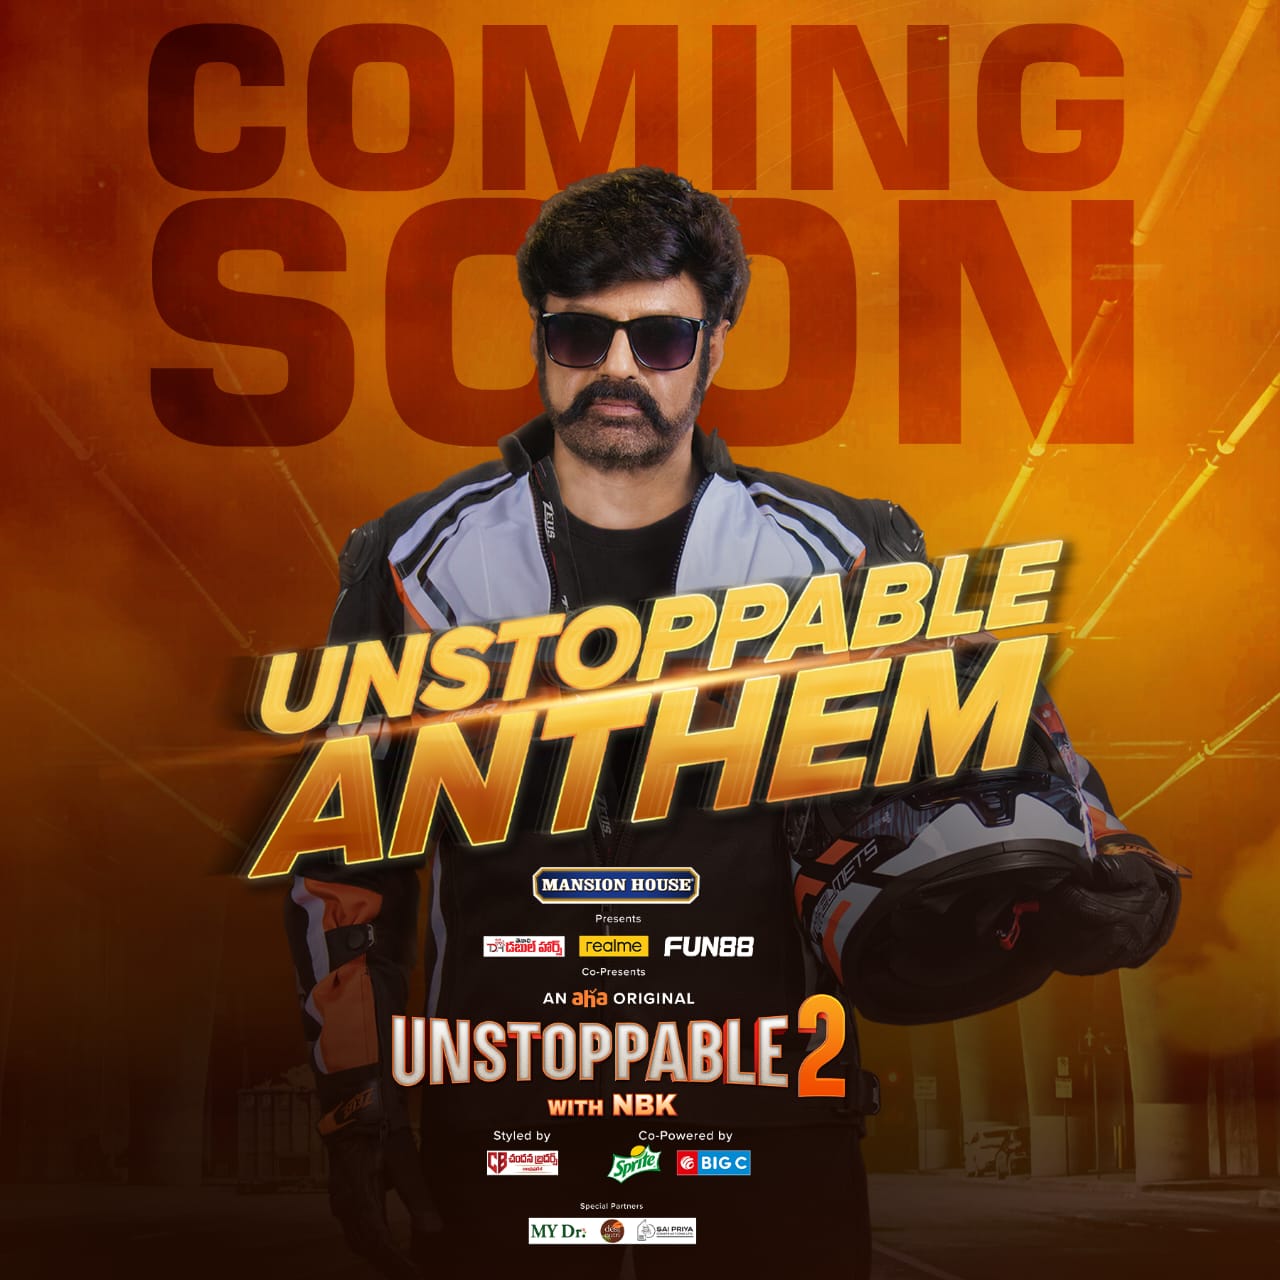 All eyes are on Unstoppable 2 anthem